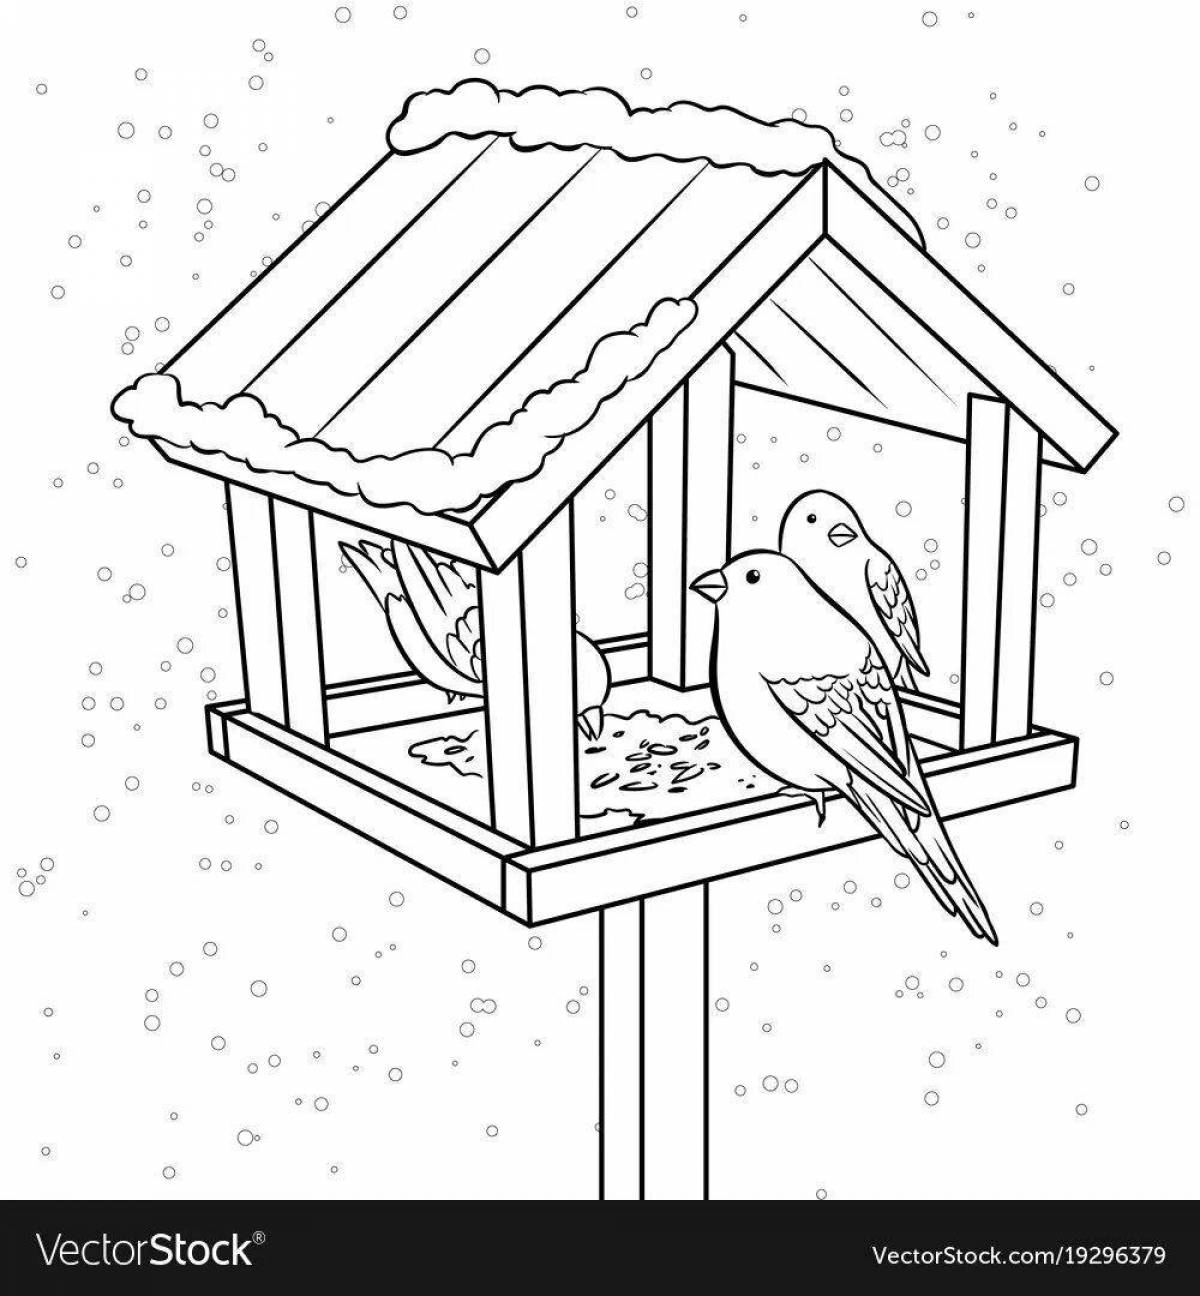 Amazing bird feeder coloring book for kids